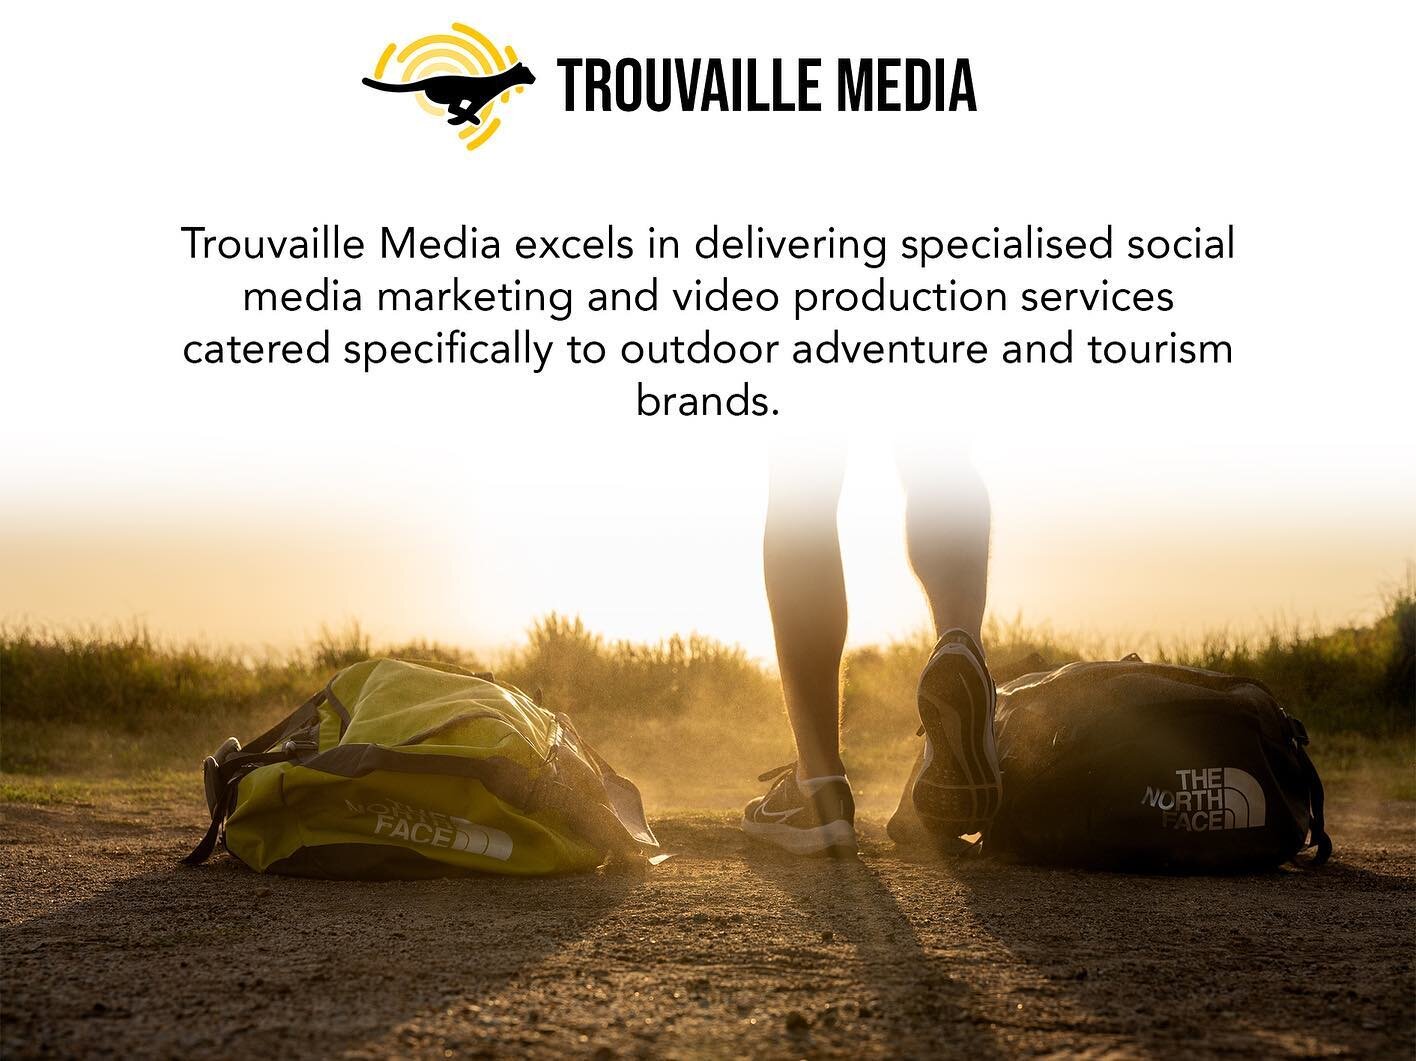 At Trouvaille Media we are deeply passionate about outdoor adventure and tourism brands because we share their love for exploration and the great outdoors. 🌿

By focusing on these niches, we are able to leverage our expertise to authentically connec